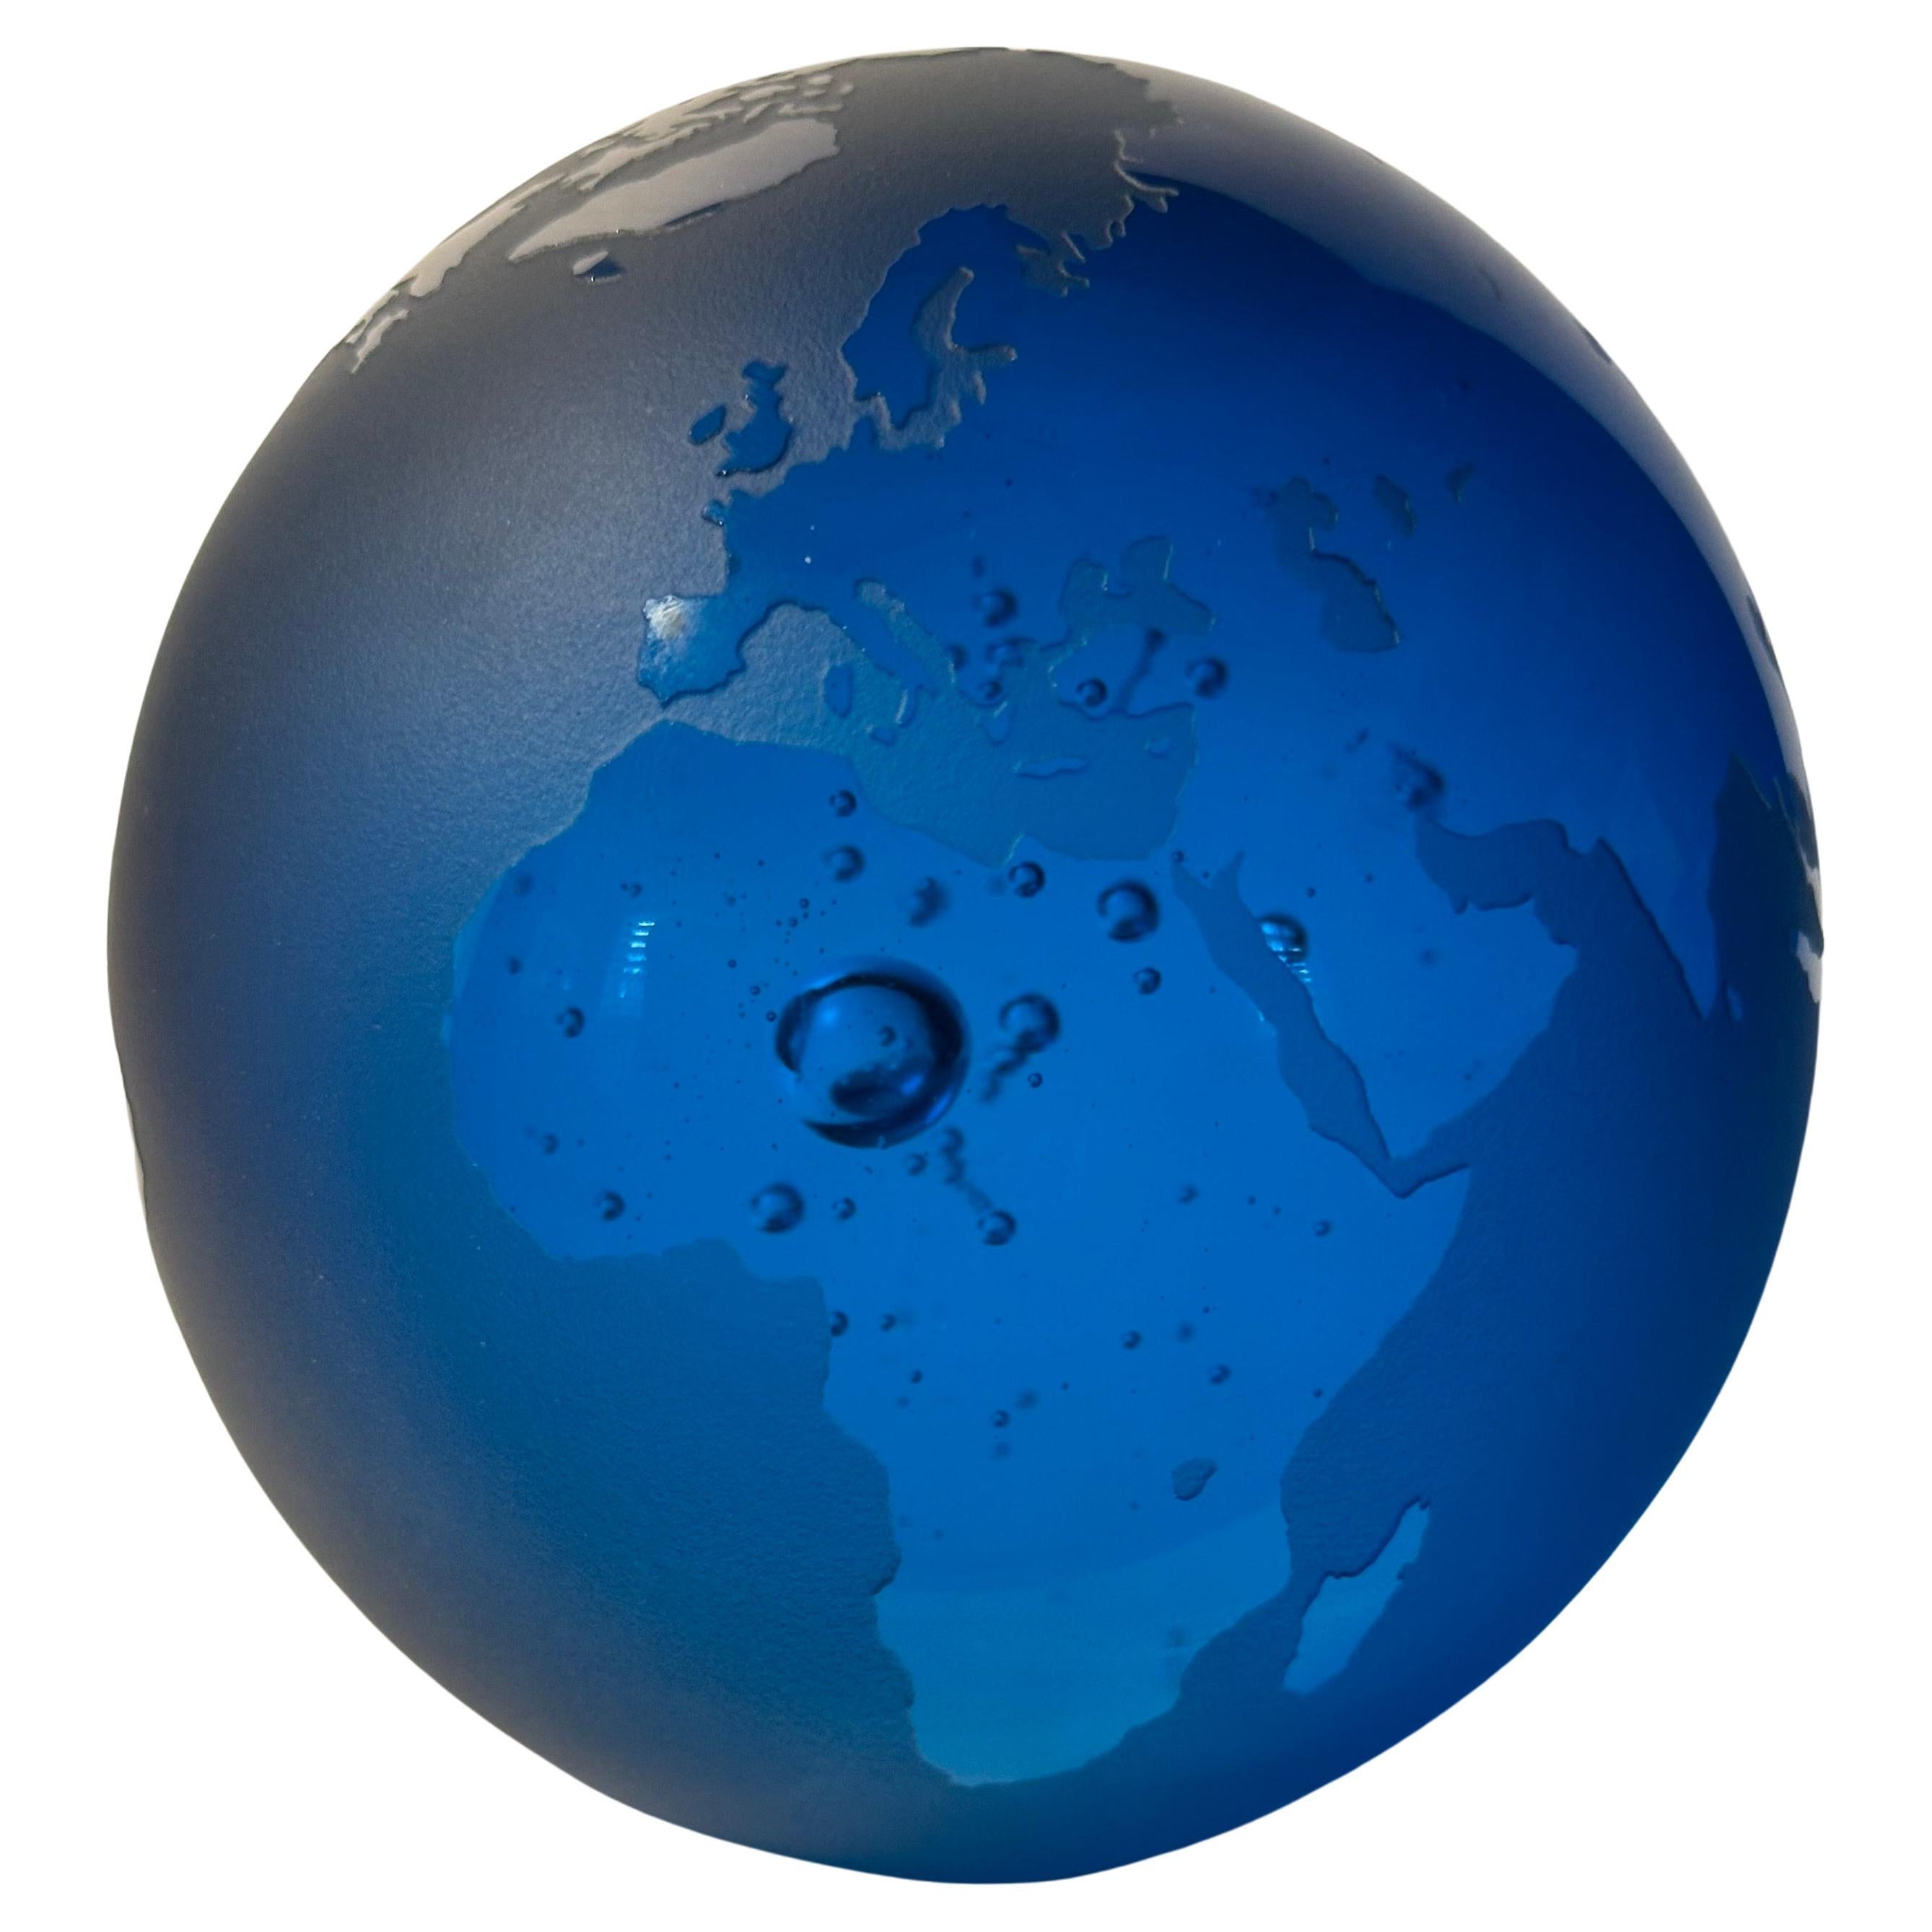 World Globe Art Glass Paperweight by Steven Correia For Sale